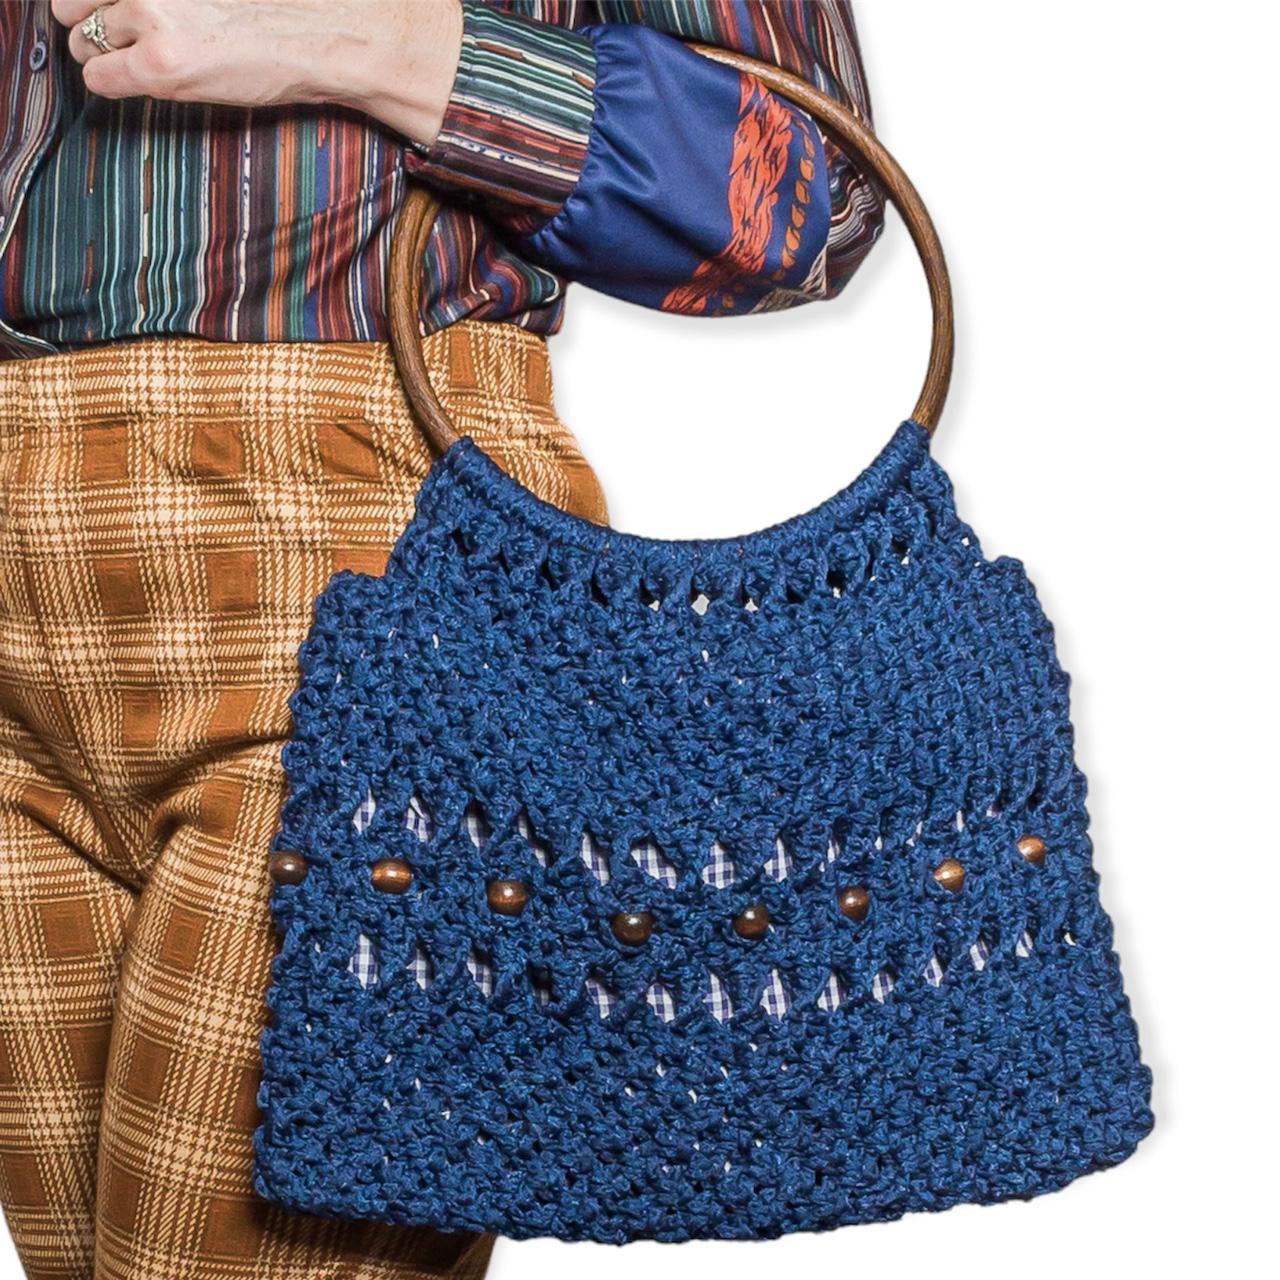 Cotton Rope Macrame Bags in Multicolors, India at Rs 300/piece in Noida |  ID: 19532675891